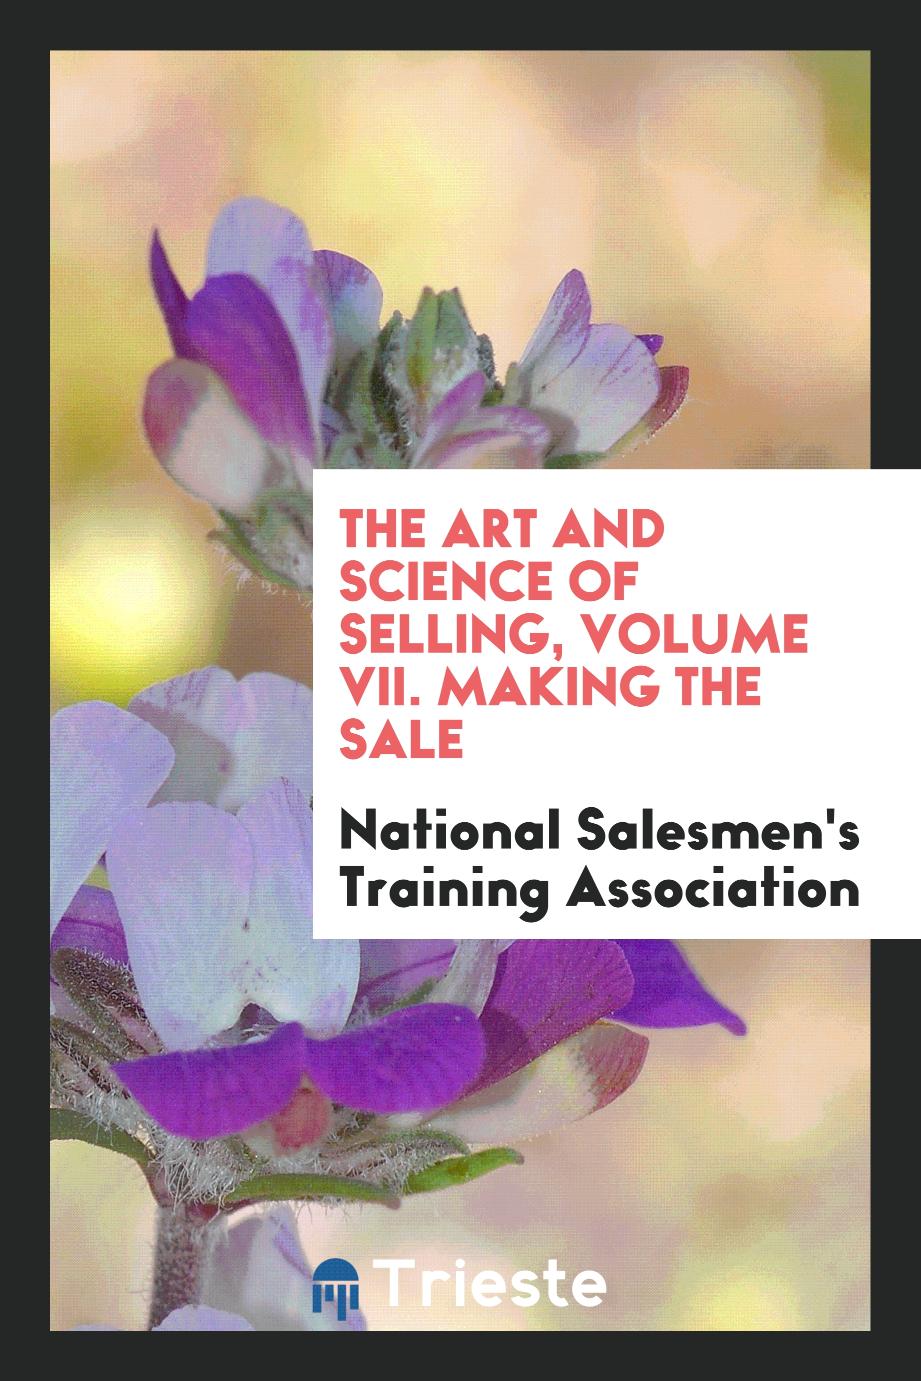 The Art and Science of Selling, Volume VII. Making the Sale